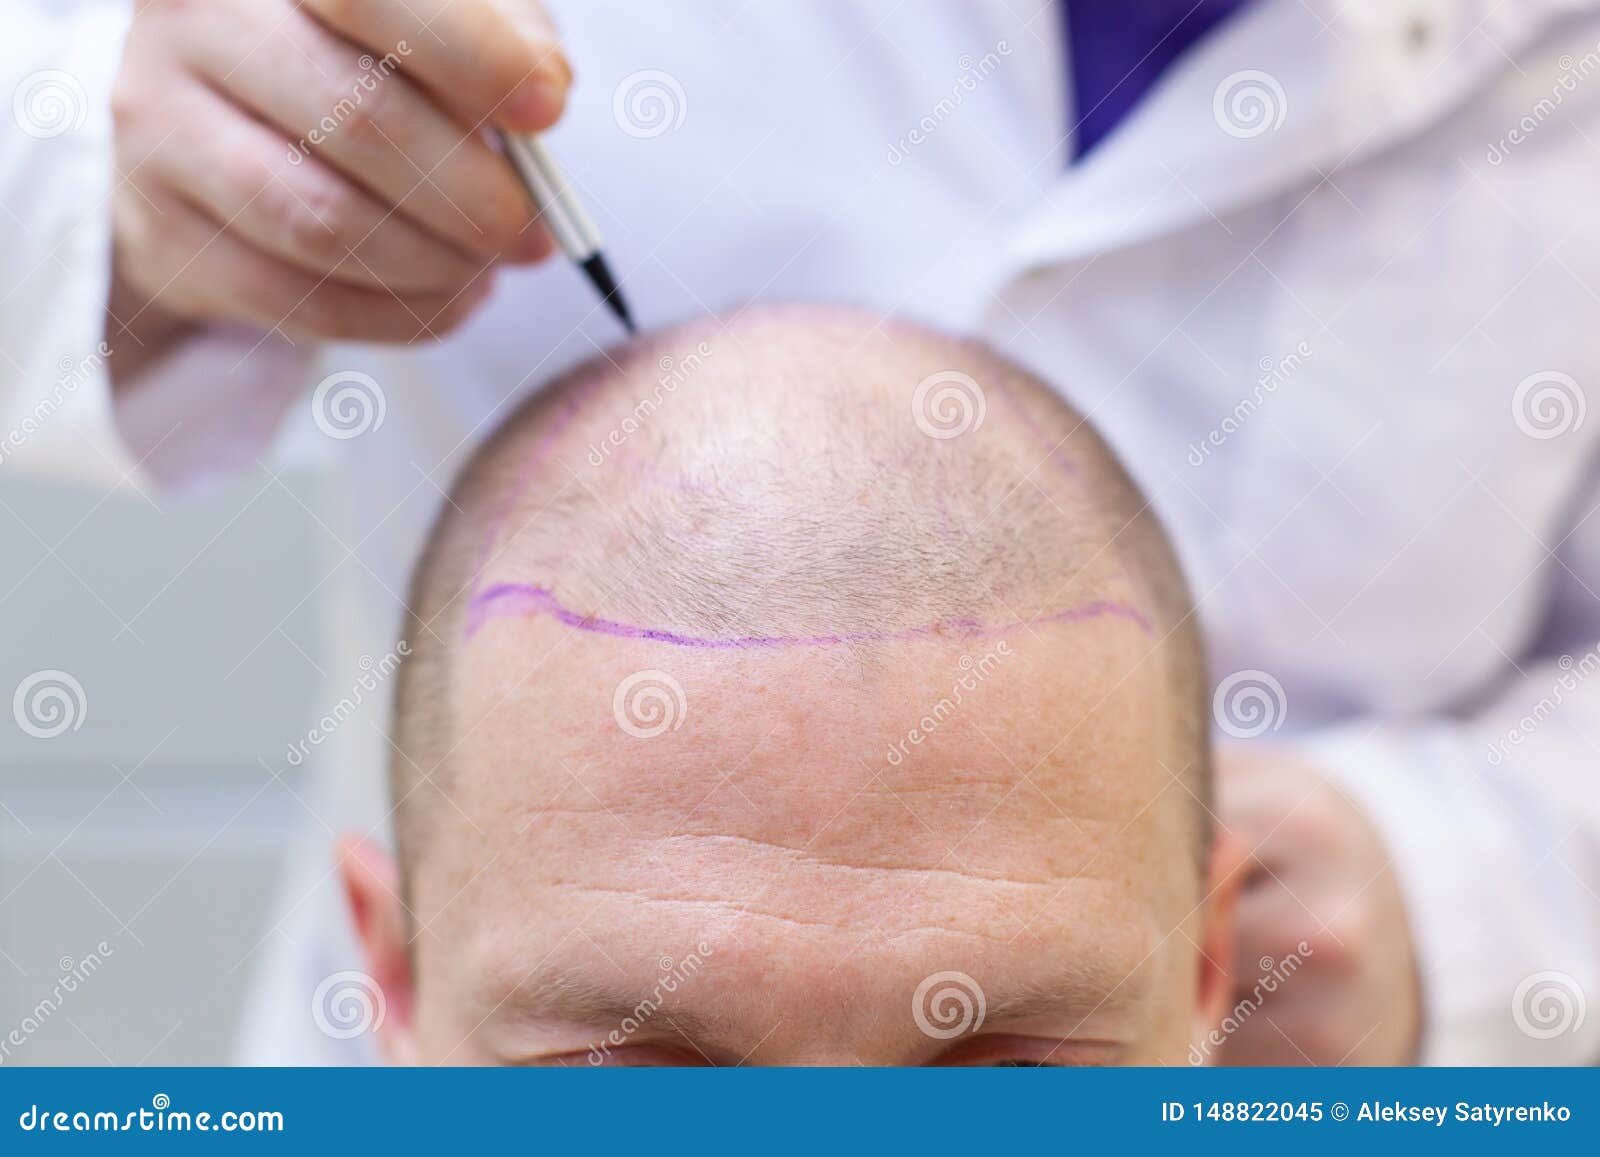 baldness treatment. patient suffering from hair loss in consultation with a doctor. preparation for hair transplant